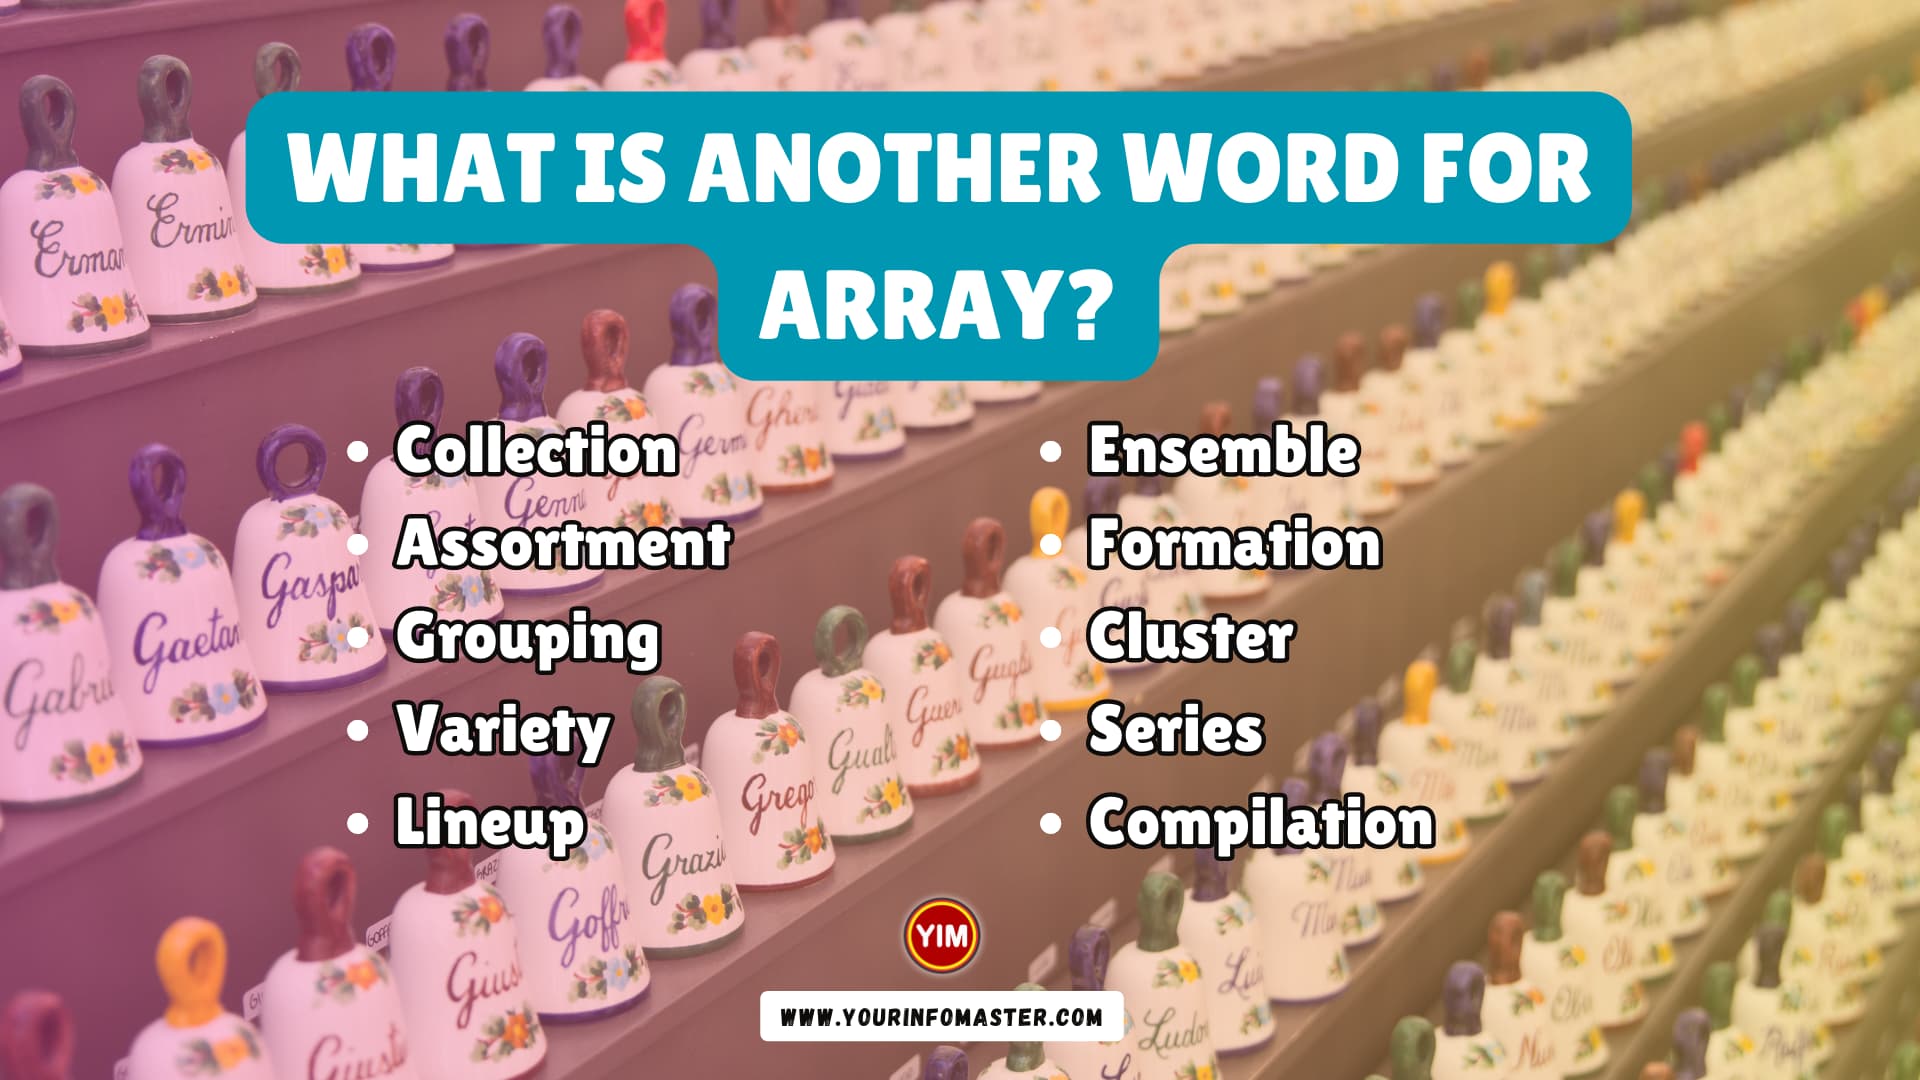 What is another word for Array